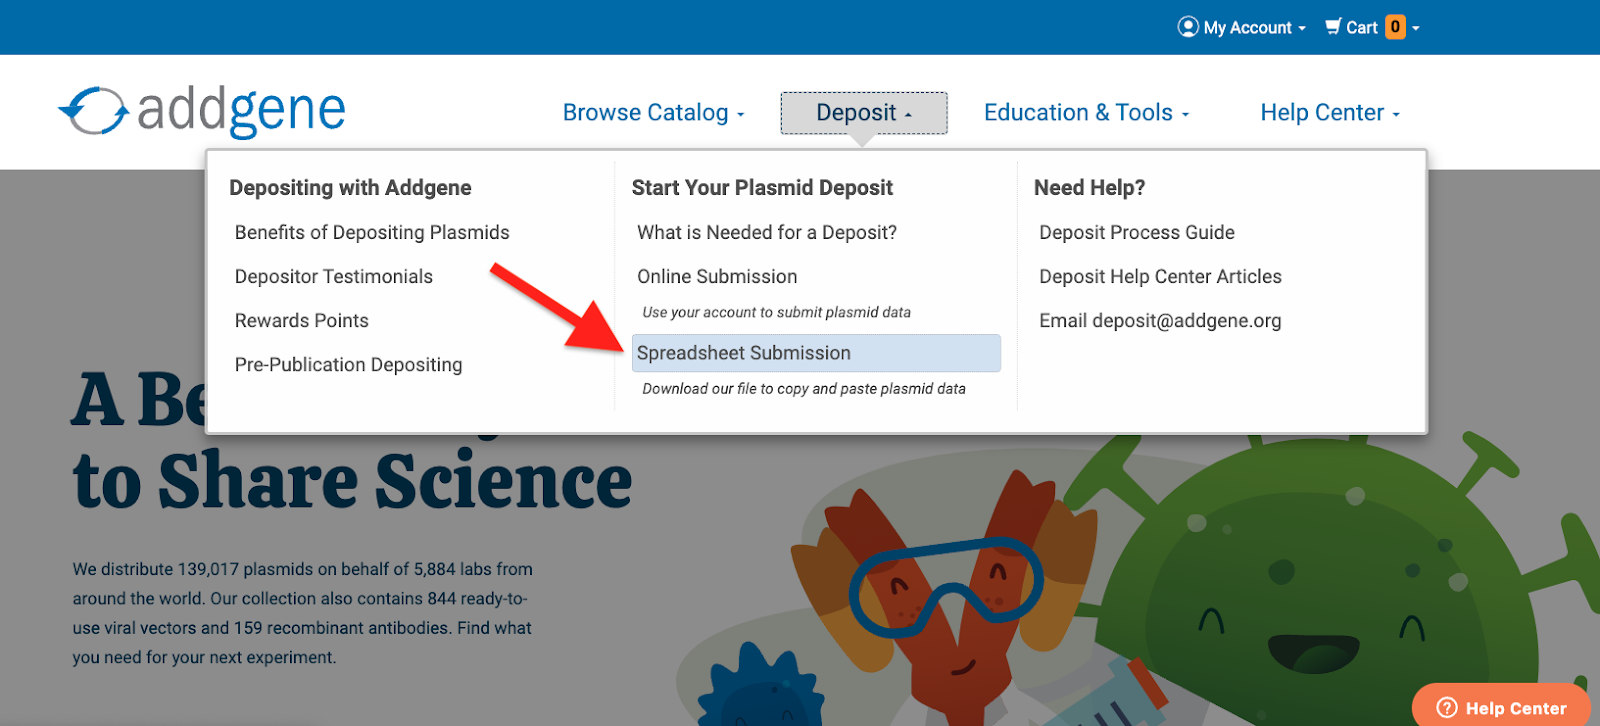 A screenshot of the Addgene home page with an arrow pointing at Spreadsheet Submission on the Deposit drop-down menu.